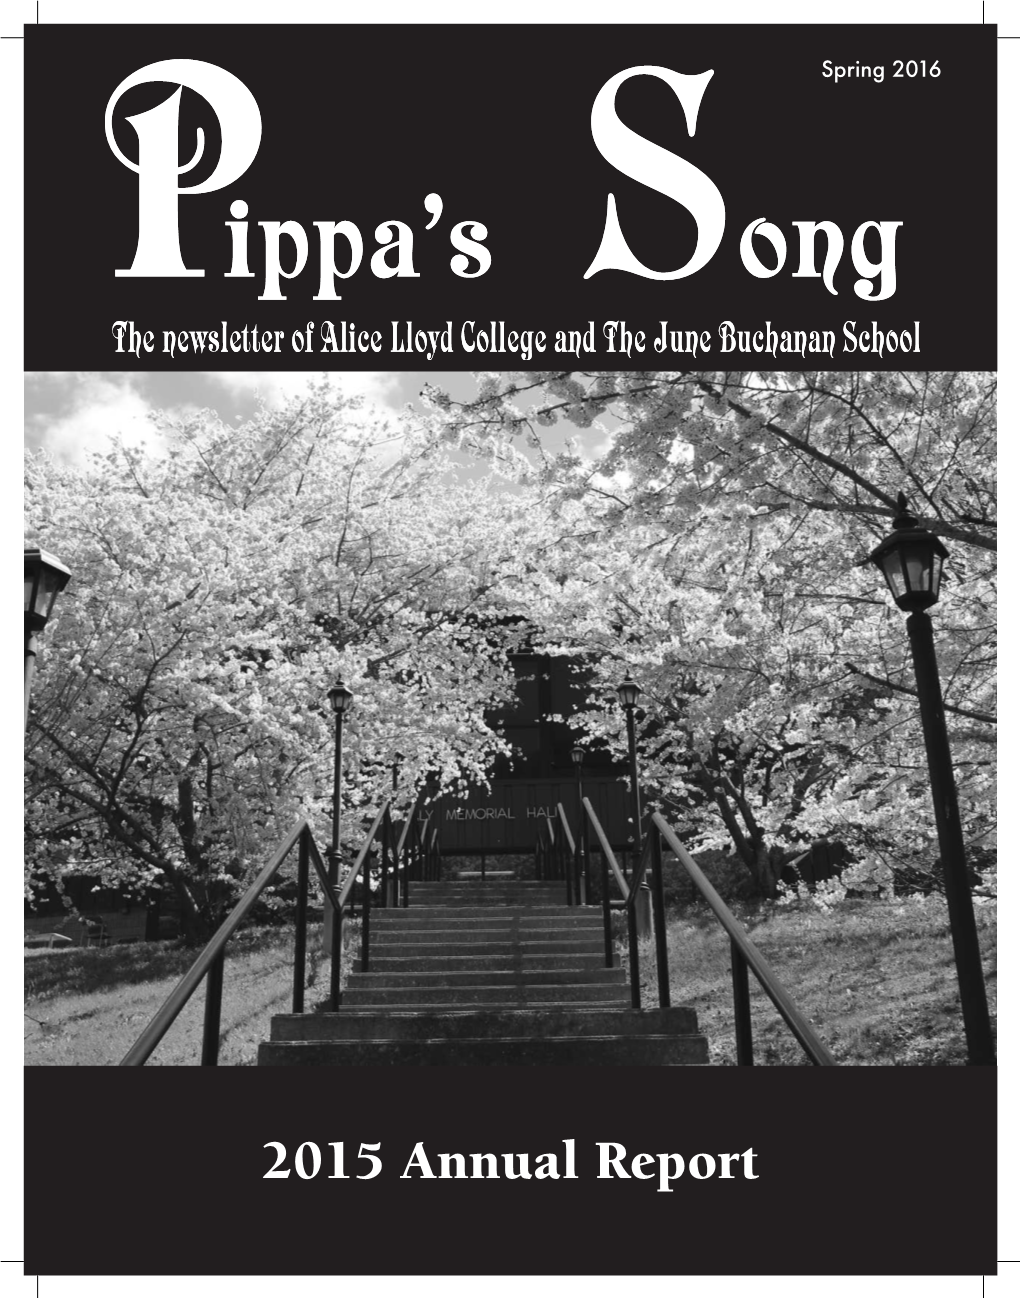 2015 Annual Report Message from the President Dear Friends, I Hope This Edition of Pippa’S Song Finds You Well